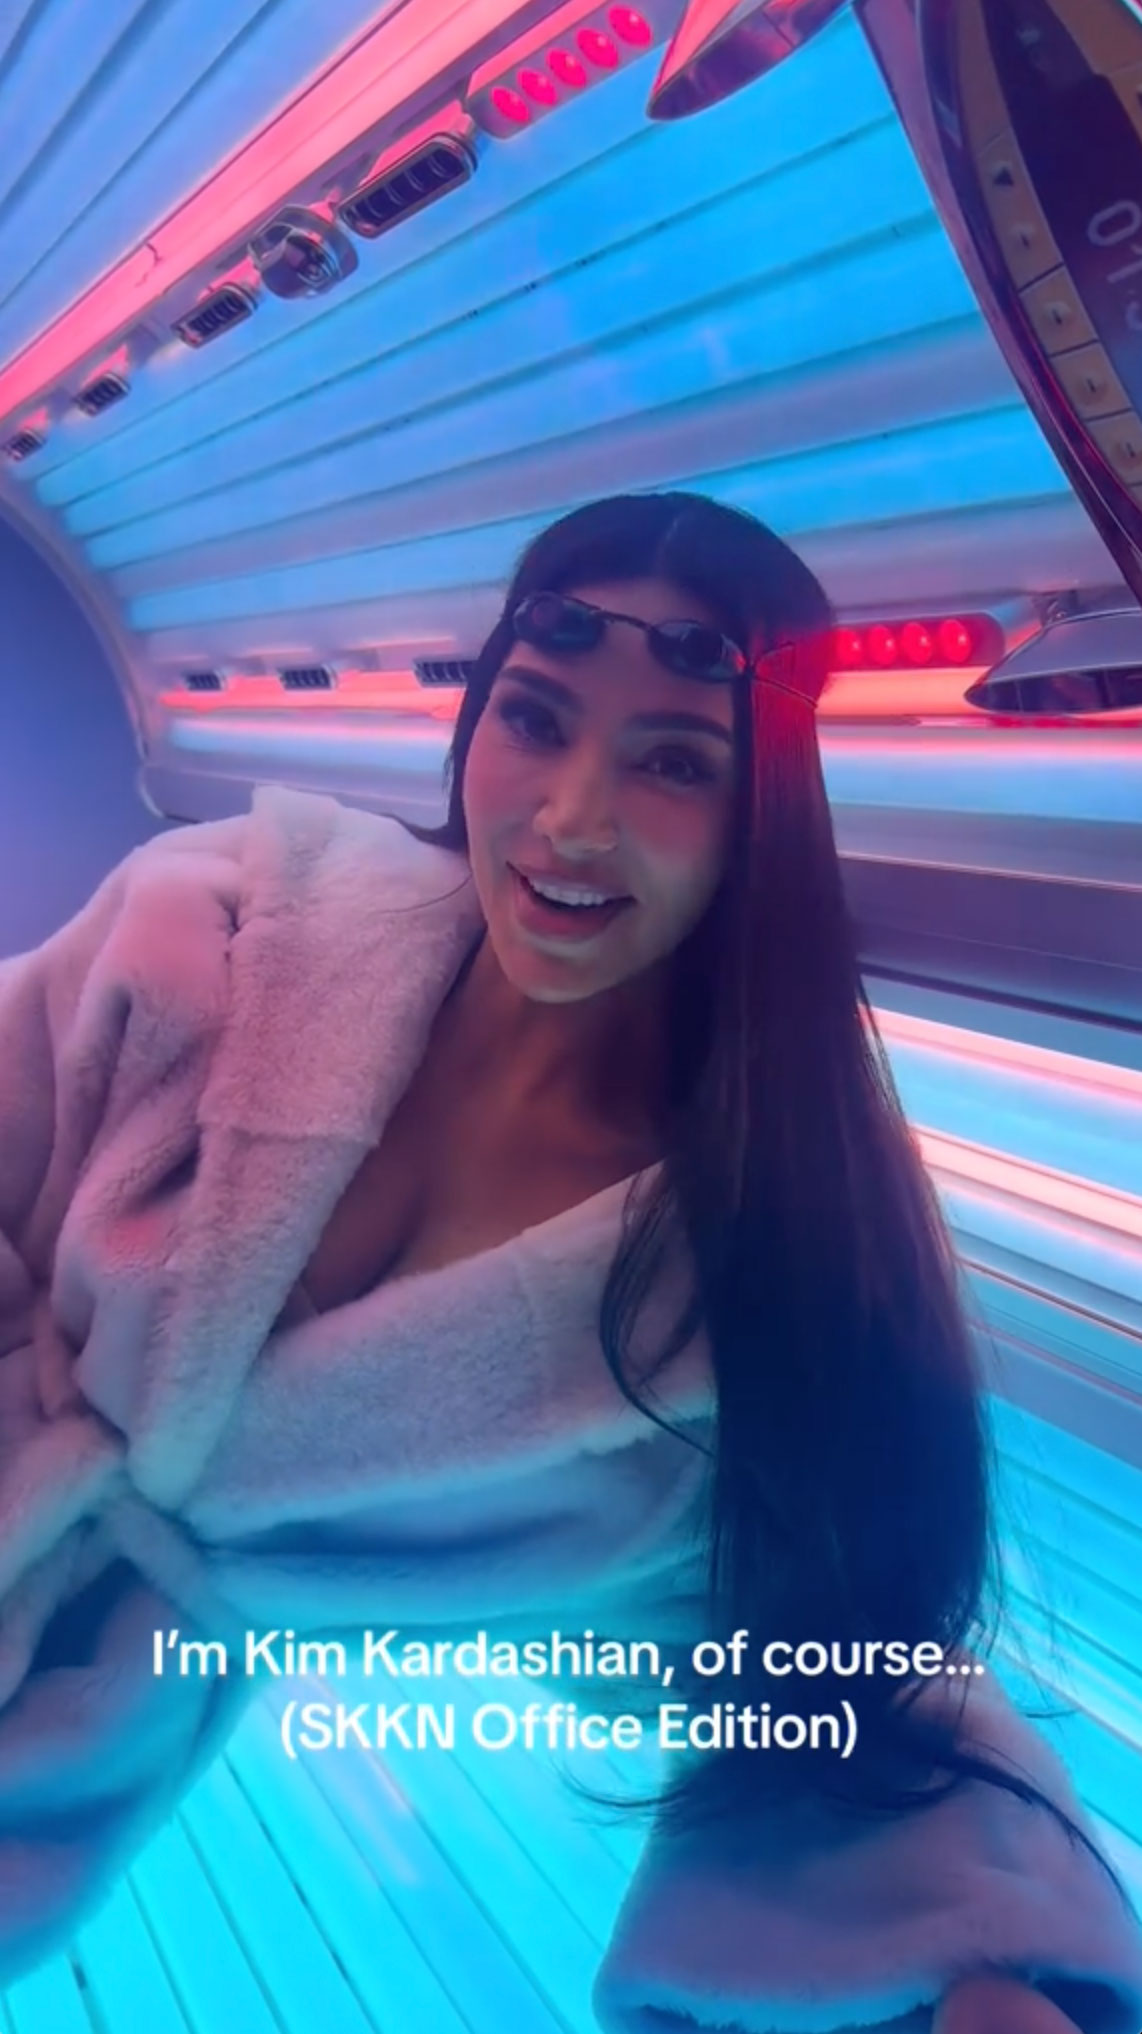 Kim showed off the tanning bed in her SKKN office in a TikTok video